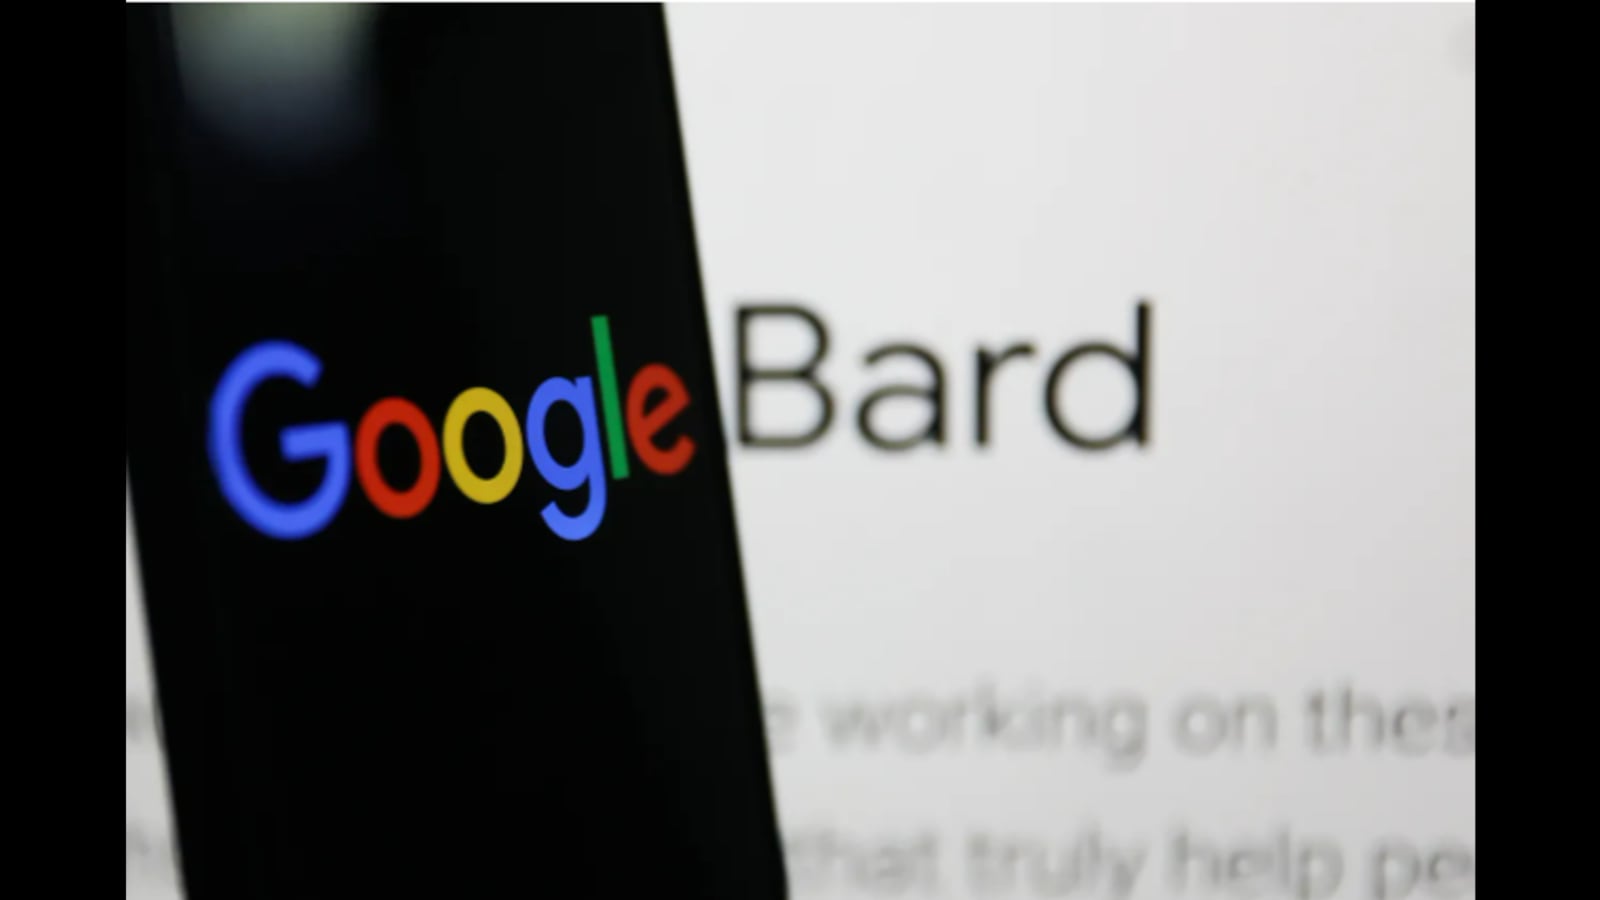 Bard, Google's ChatGPT rival is here and it has sparked a lot of chatter